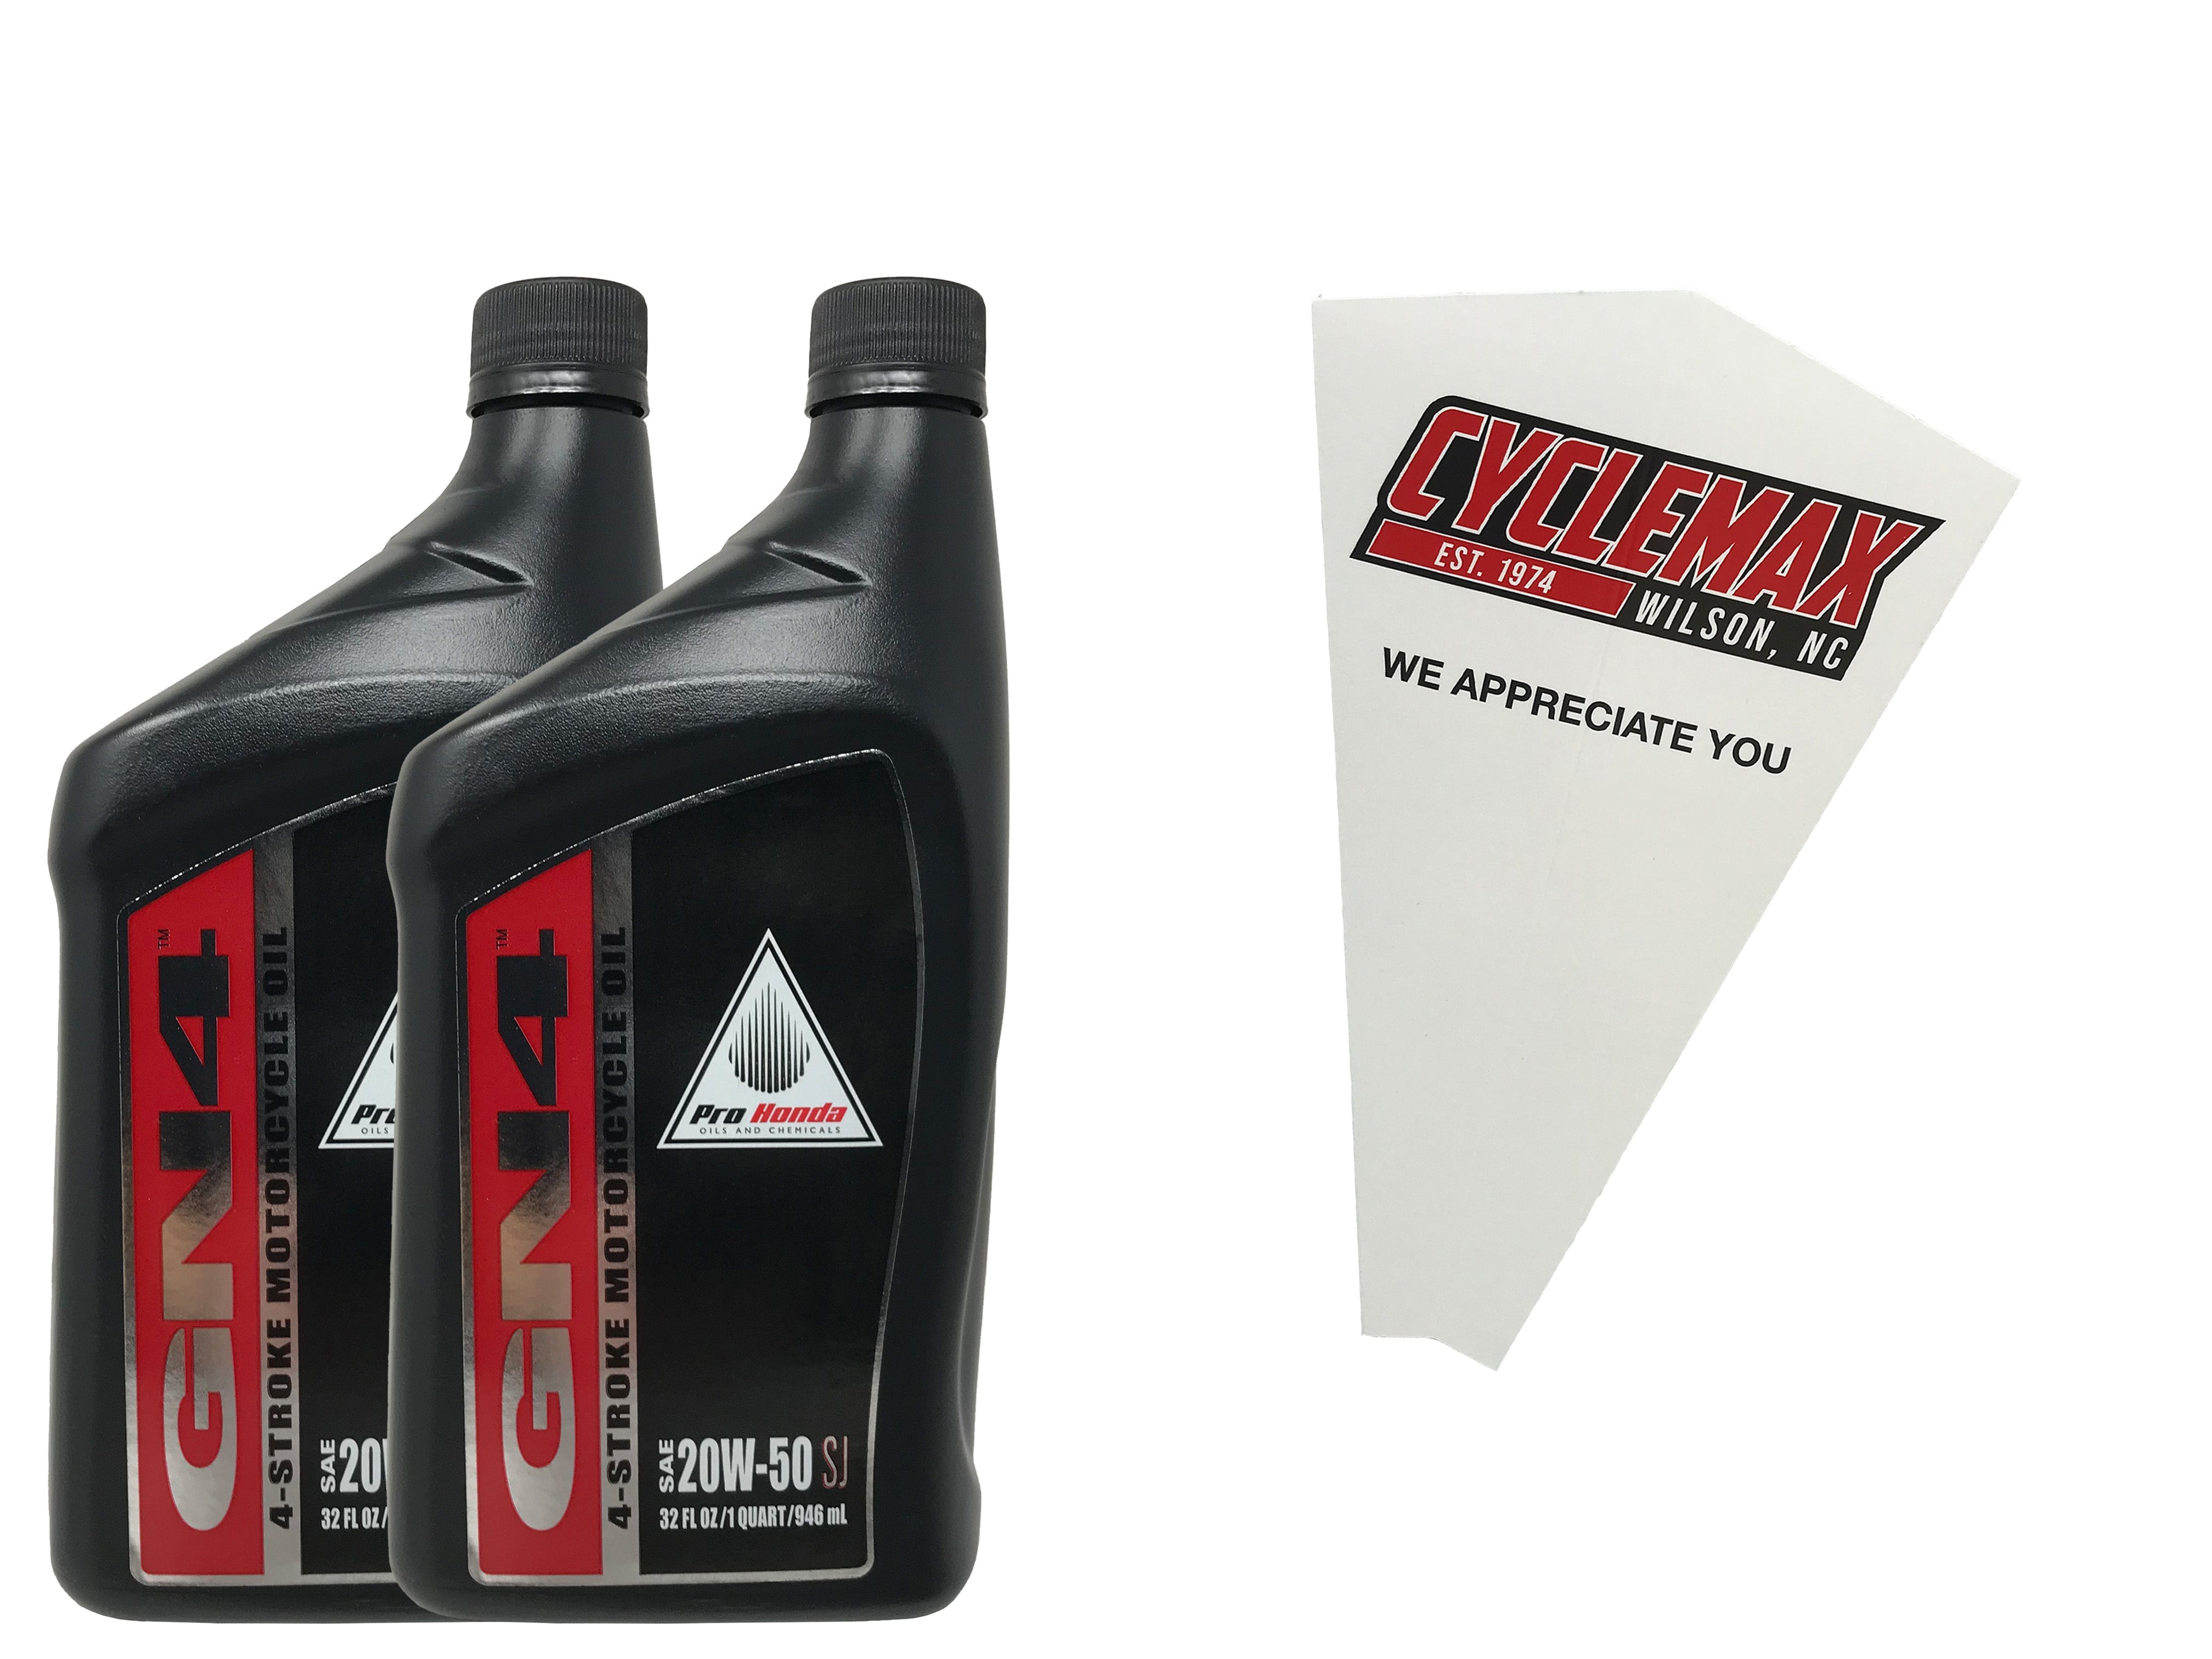 Cyclemax Two Pack for Honda GN4 20W50 Engine Oil 08C35-A251M01 Contains Two Quarts and a Funnel